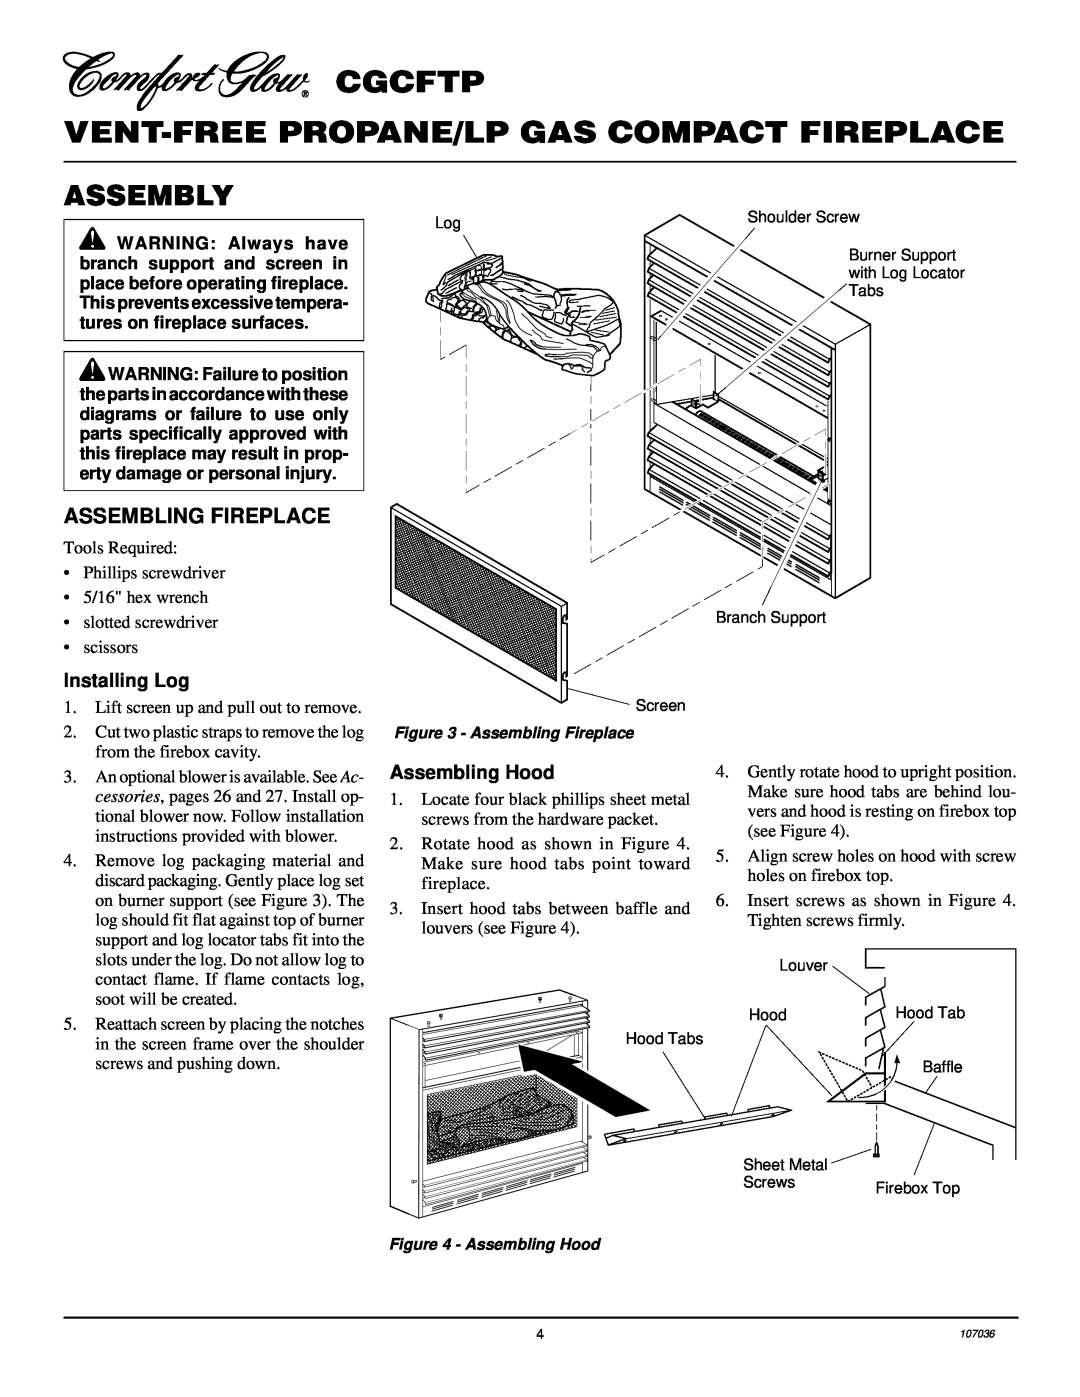 Desa 000 to 26, CGCFTP 14 installation manual Assembly, Assembling Fireplace, Installing Log, Assembling Hood 